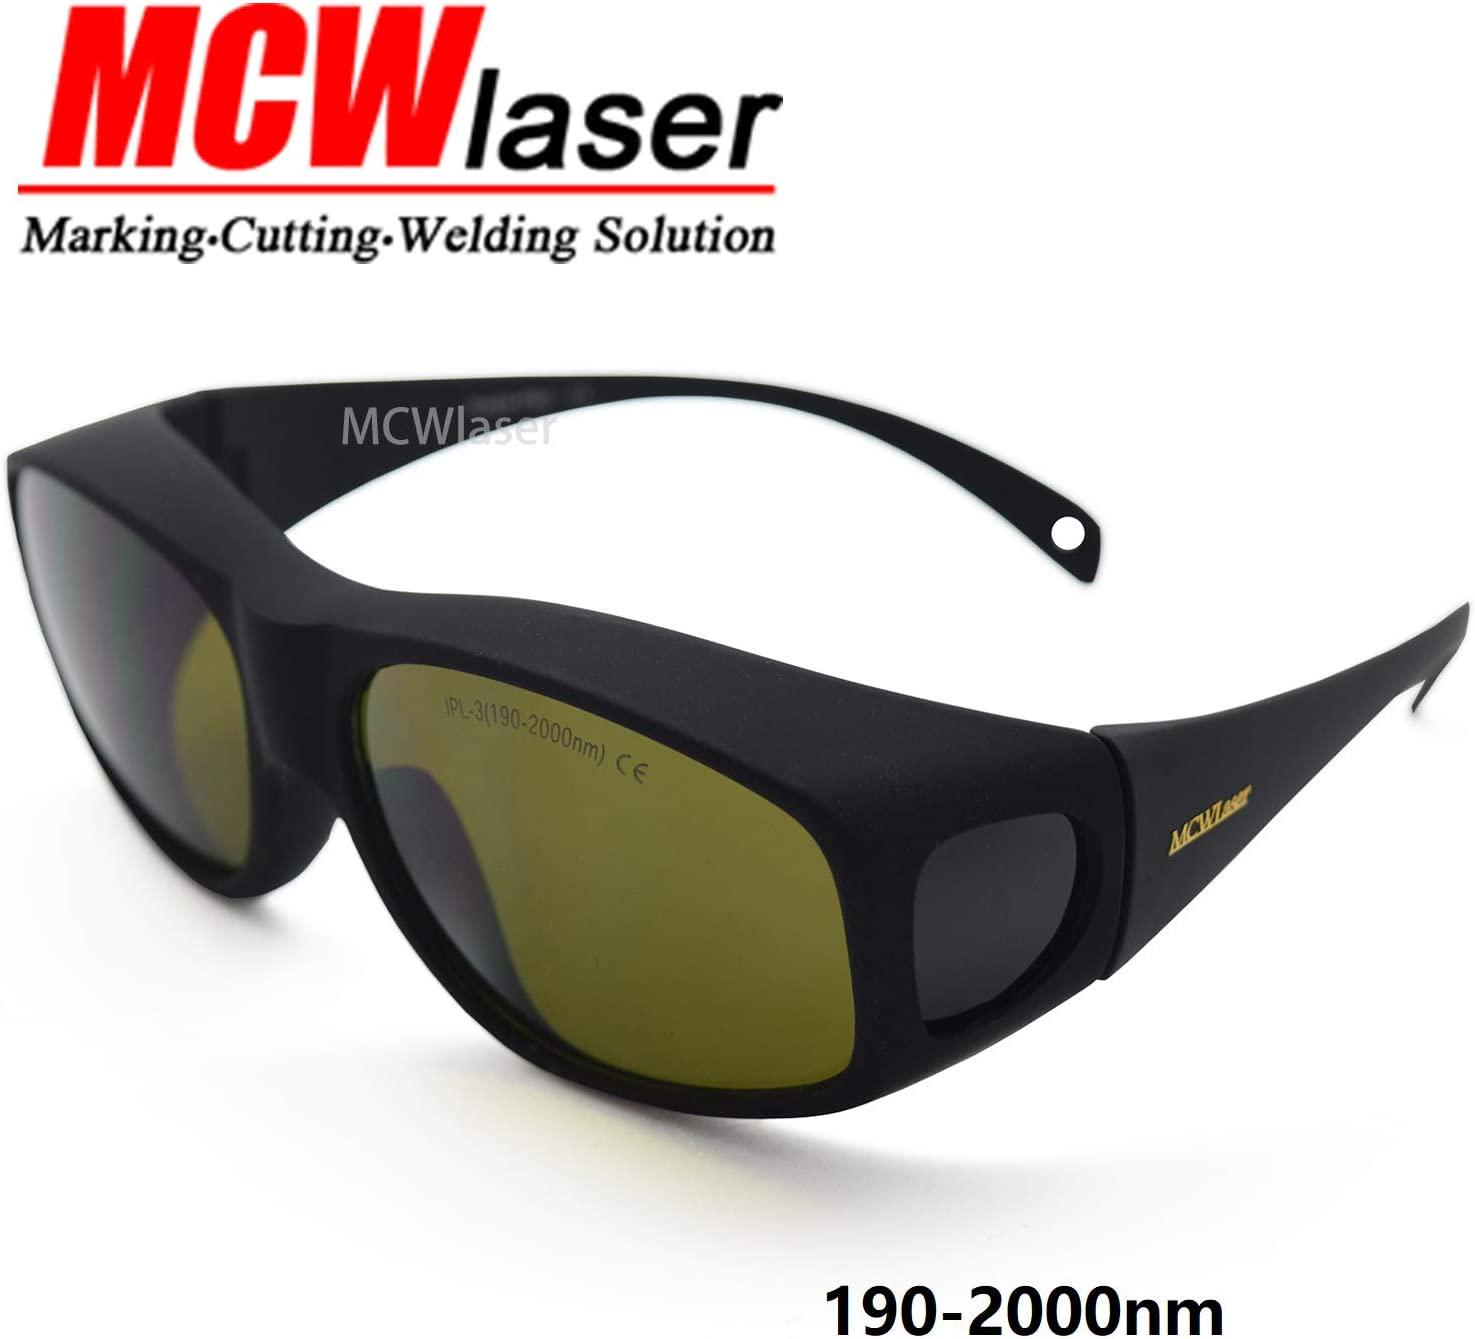 MCWlaser, MCWlaser IPL Laser Safety Glasses 190nm-2000nm Eye Protection Goggle For Hair Removal Laser Cosmetology Photon Light Beauty Type EP-20 Style 9